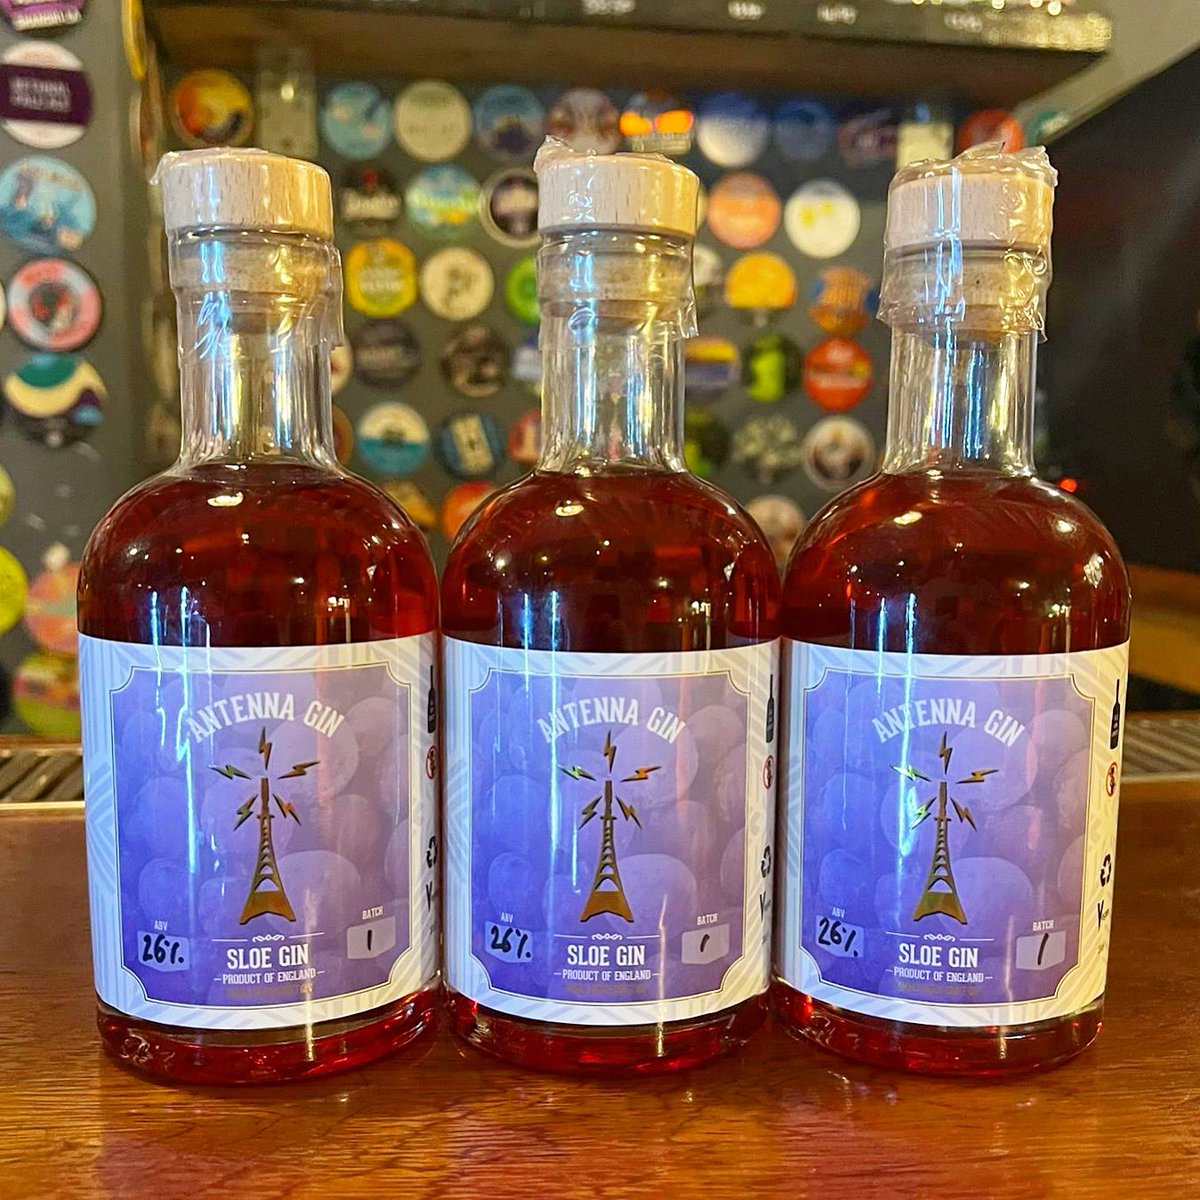 Our NEW Antenna Sloe Gin is now available with our new and improved labels, so happy they’ve arrived in time for #Xmas! We’re super happy with our latest gin, so come and nab a bottle now at @CraftCourage 🍸 #AntennaGin #CraftAndCourage #GinJourney #CraftGin #CrystalPalace #SE19